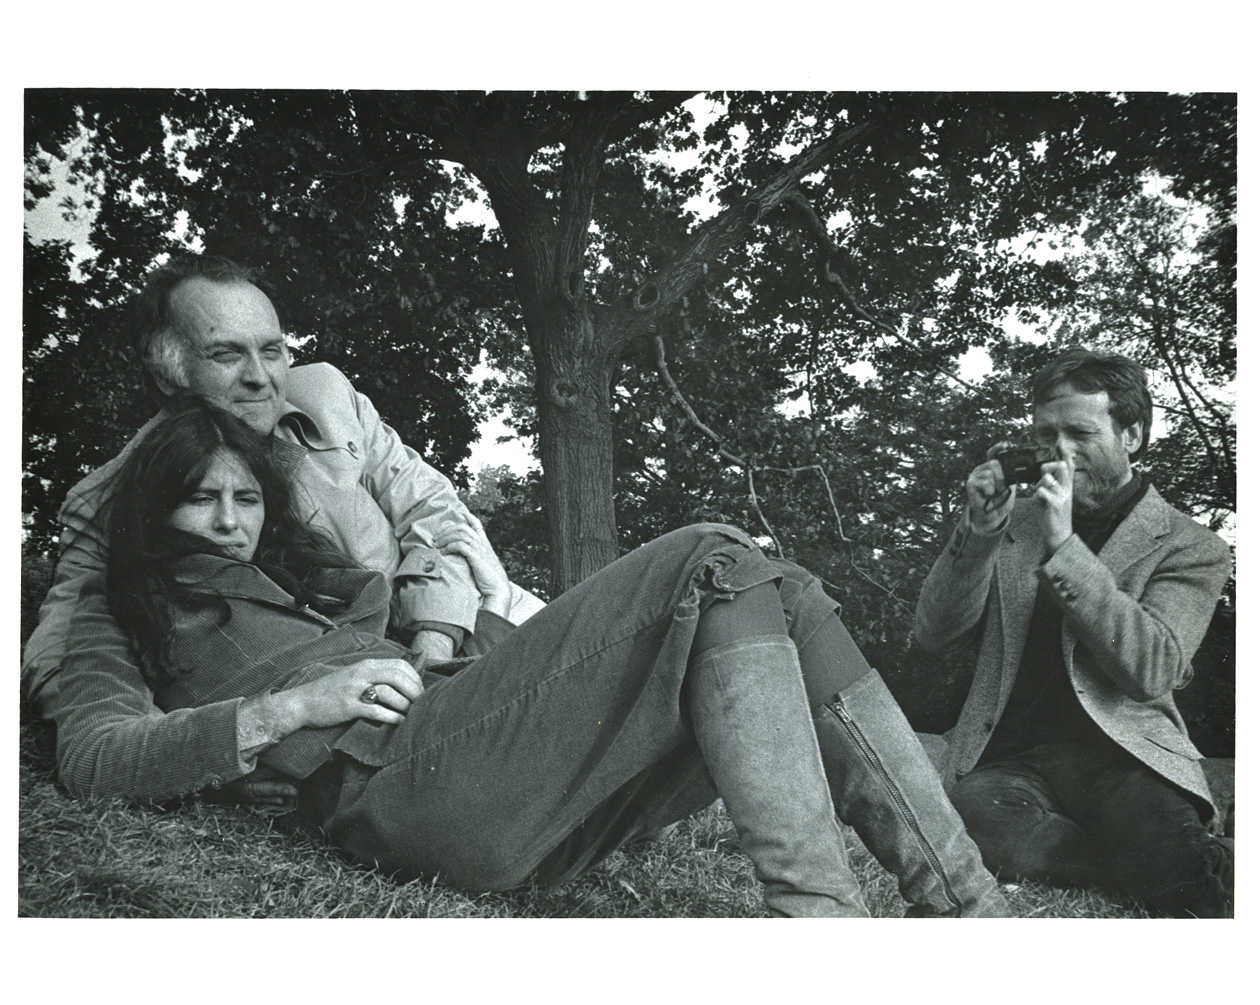 Susan Quasha and Robert Duncan being photographed by George Quasha at Olana, Frederic Church’s estate in Hudson, N.Y., ca. 1984. Photograph by Don Byrd. From the Don Byrd Archive located at TK.